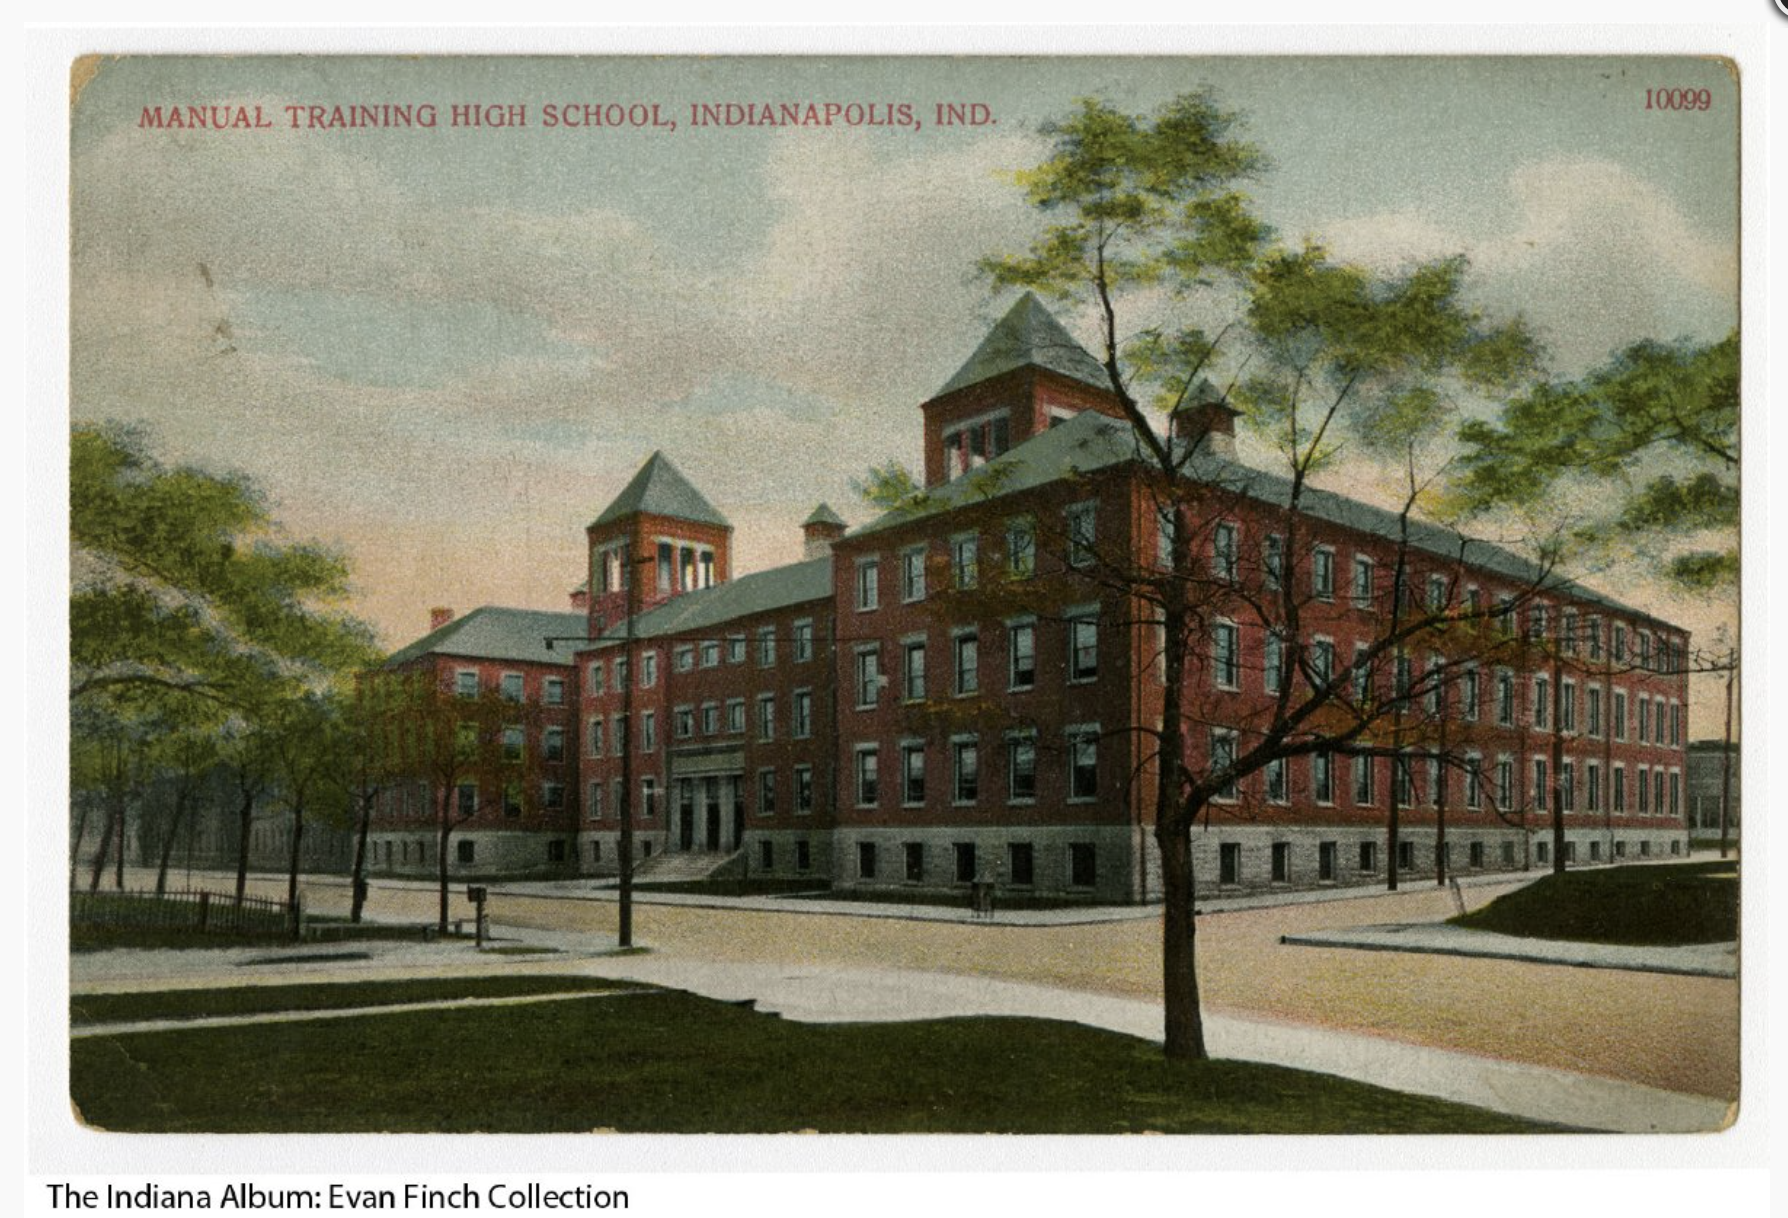 The school is a large four-story brick building with a limestone base and trim and two peaked towers on the roof.